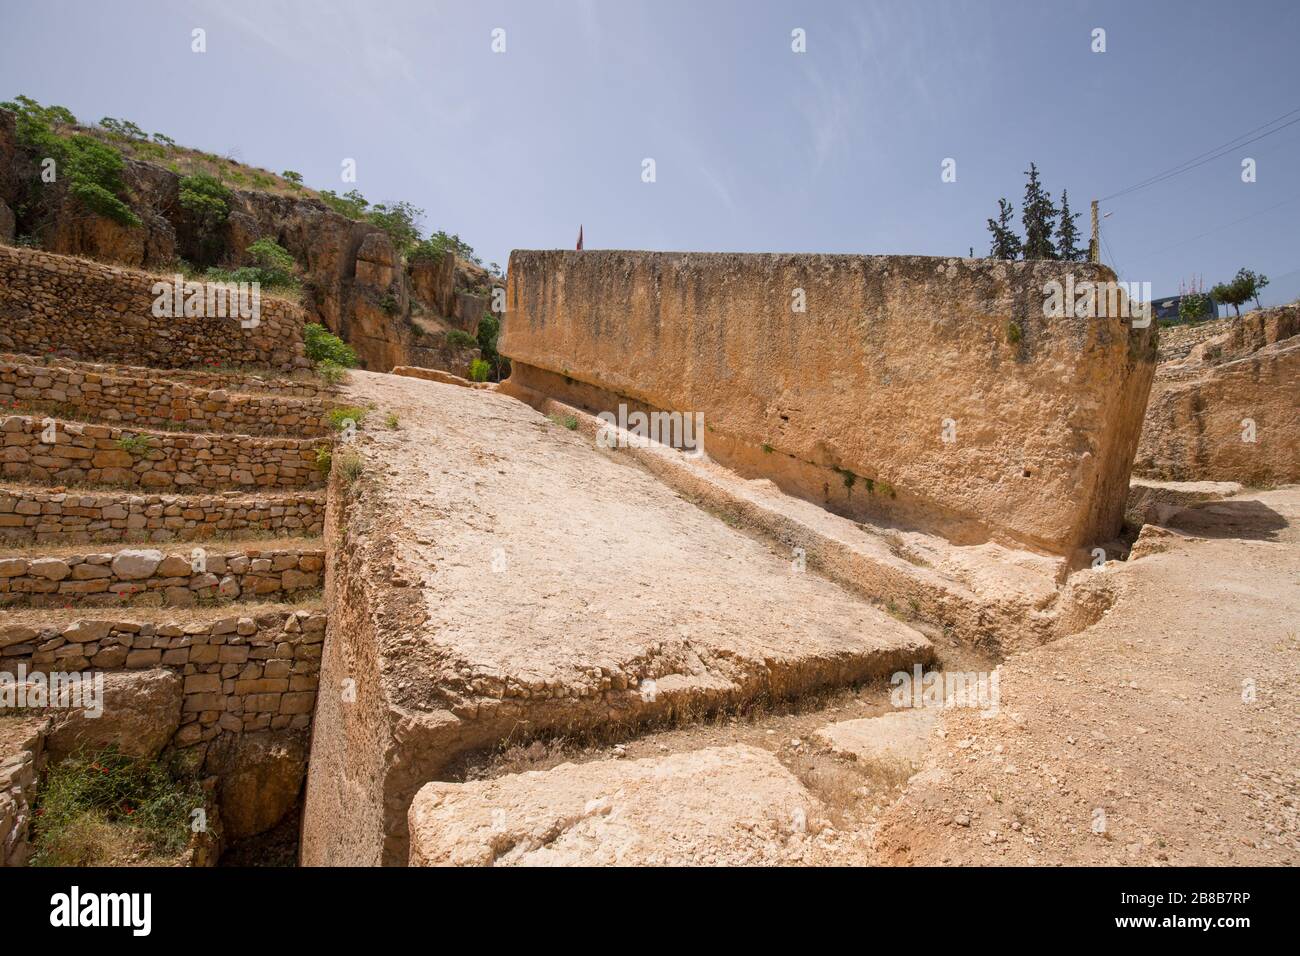 Ancient Roman quarry with a unfinished Roman monolith in Baalbek, Lebanon - June, 2019 Stock Photo